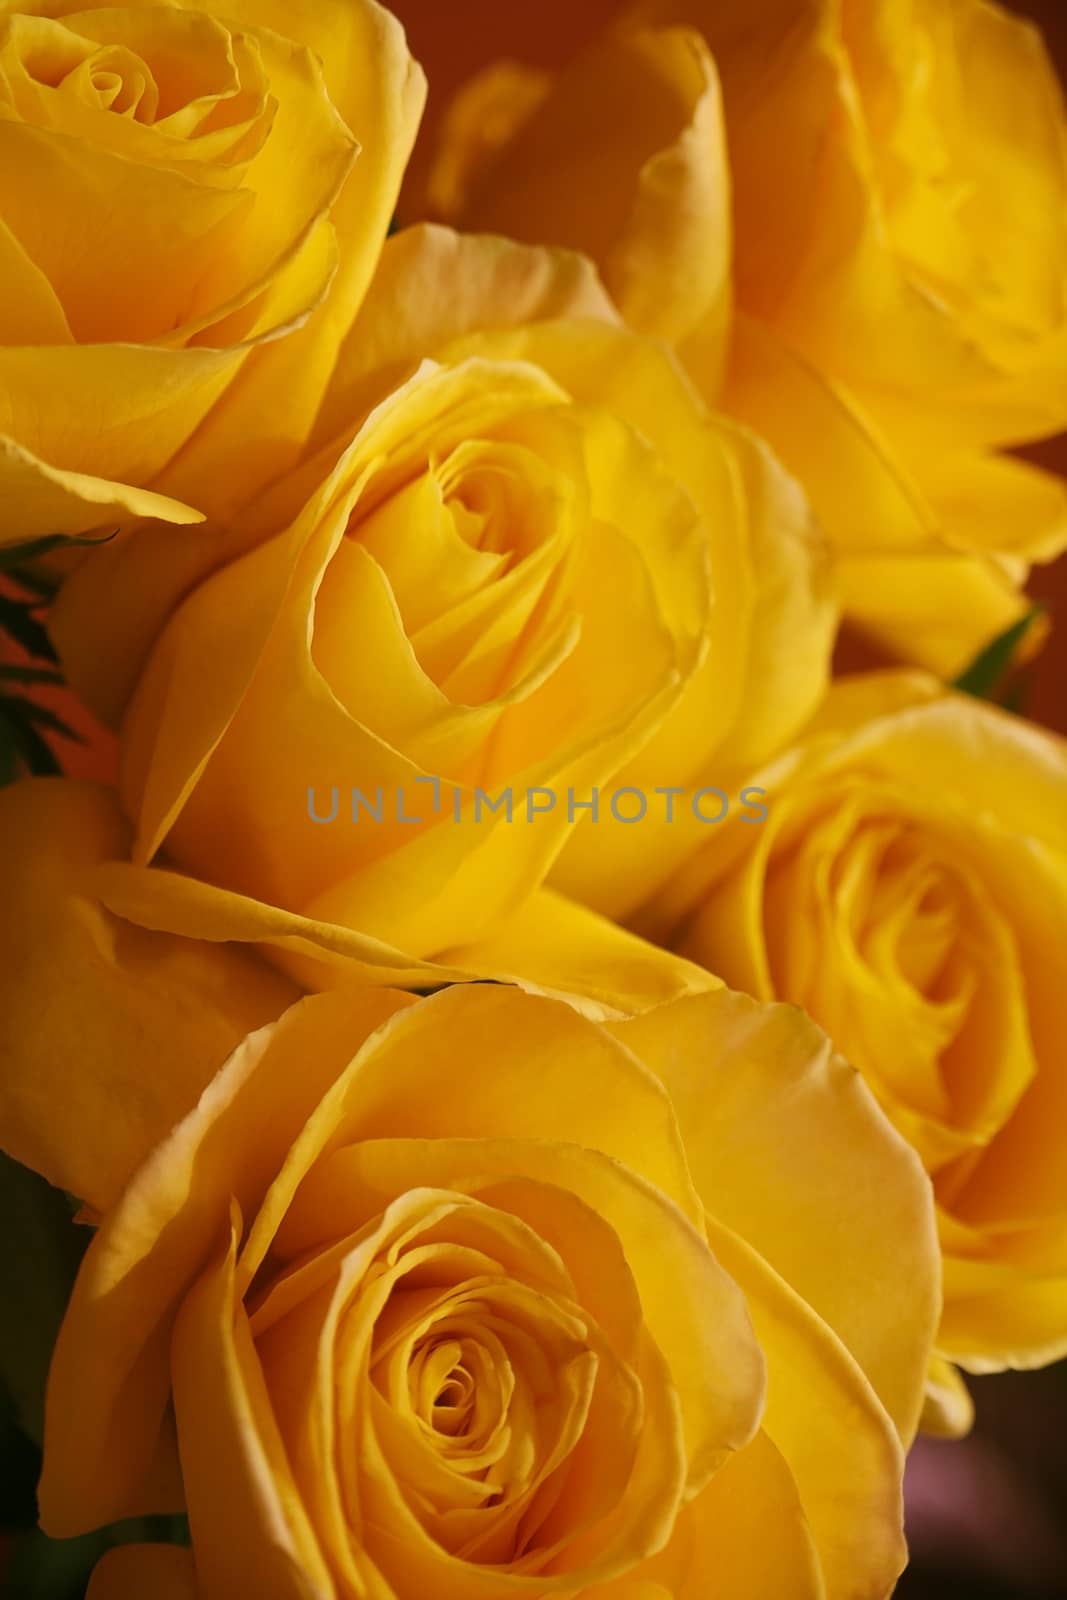 Bouquet bright beautiful yellow roses